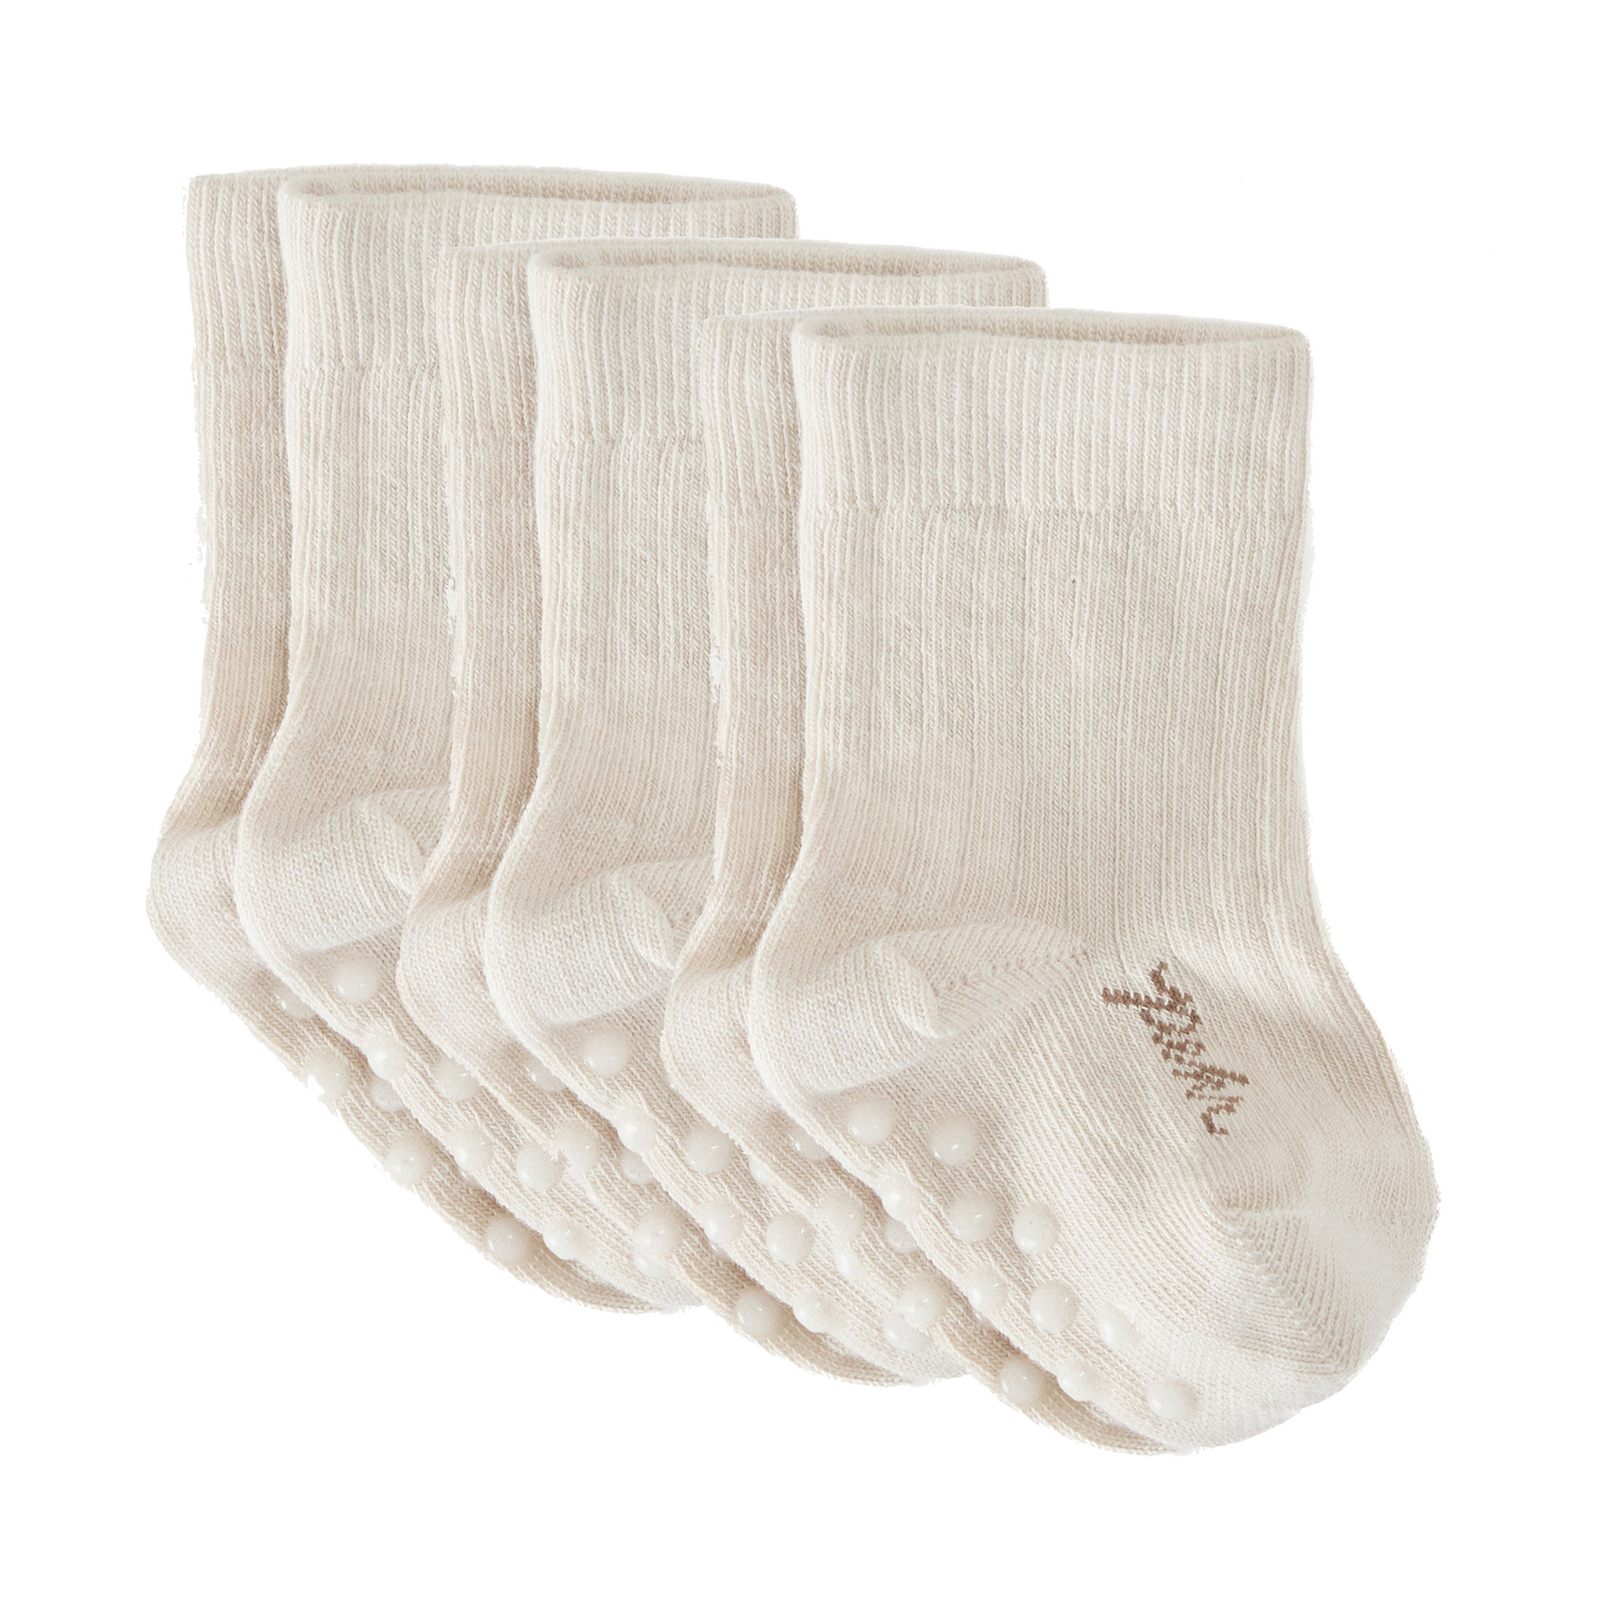 Crew Socks with Grips 3 - Pack 3-Piece Set Pehr Natural Set 0 - 6 mos. 